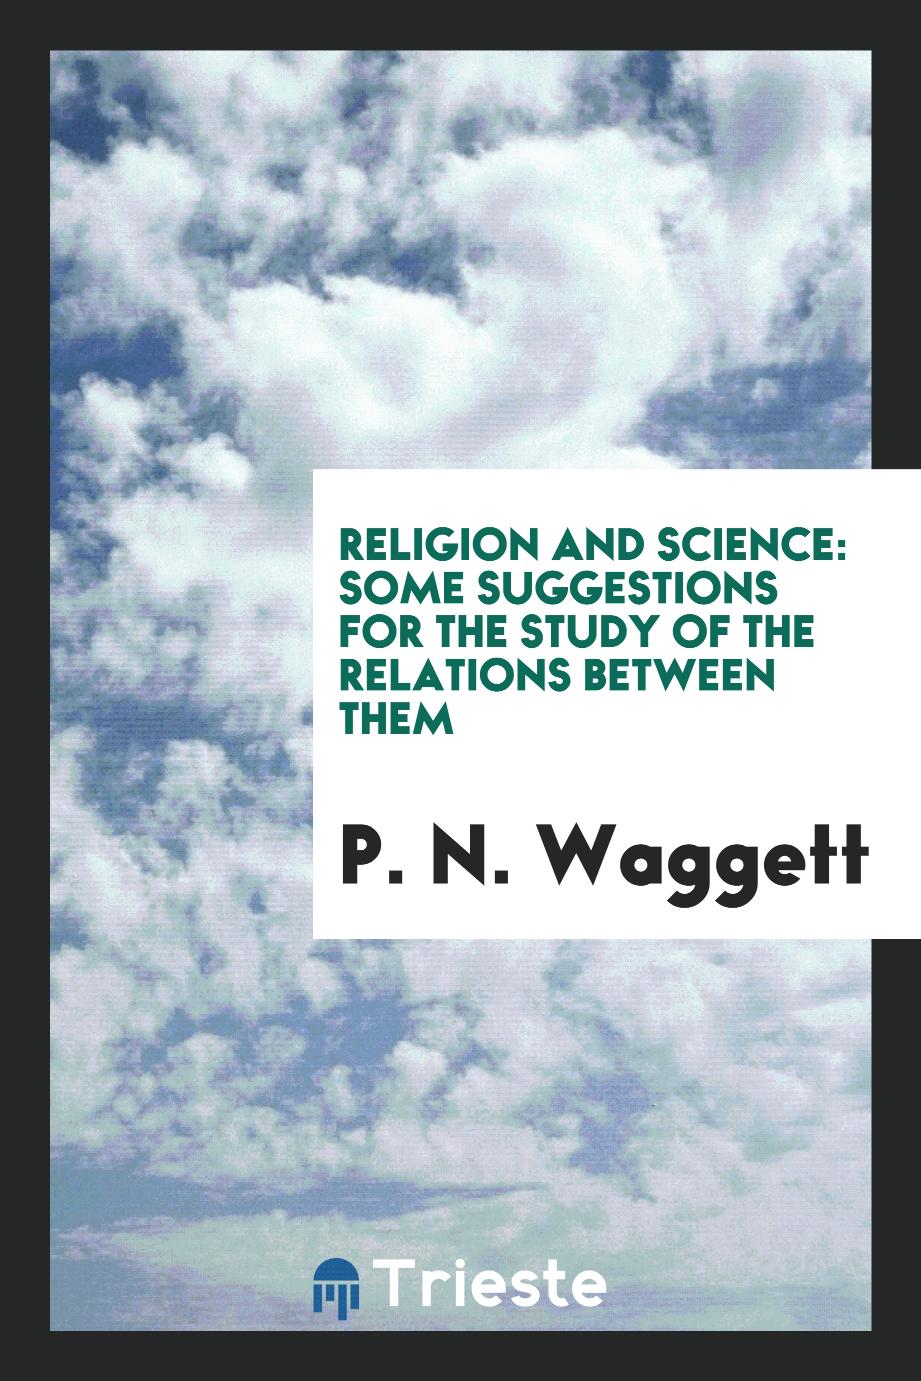 Religion and science: some suggestions for the study of the relations between them